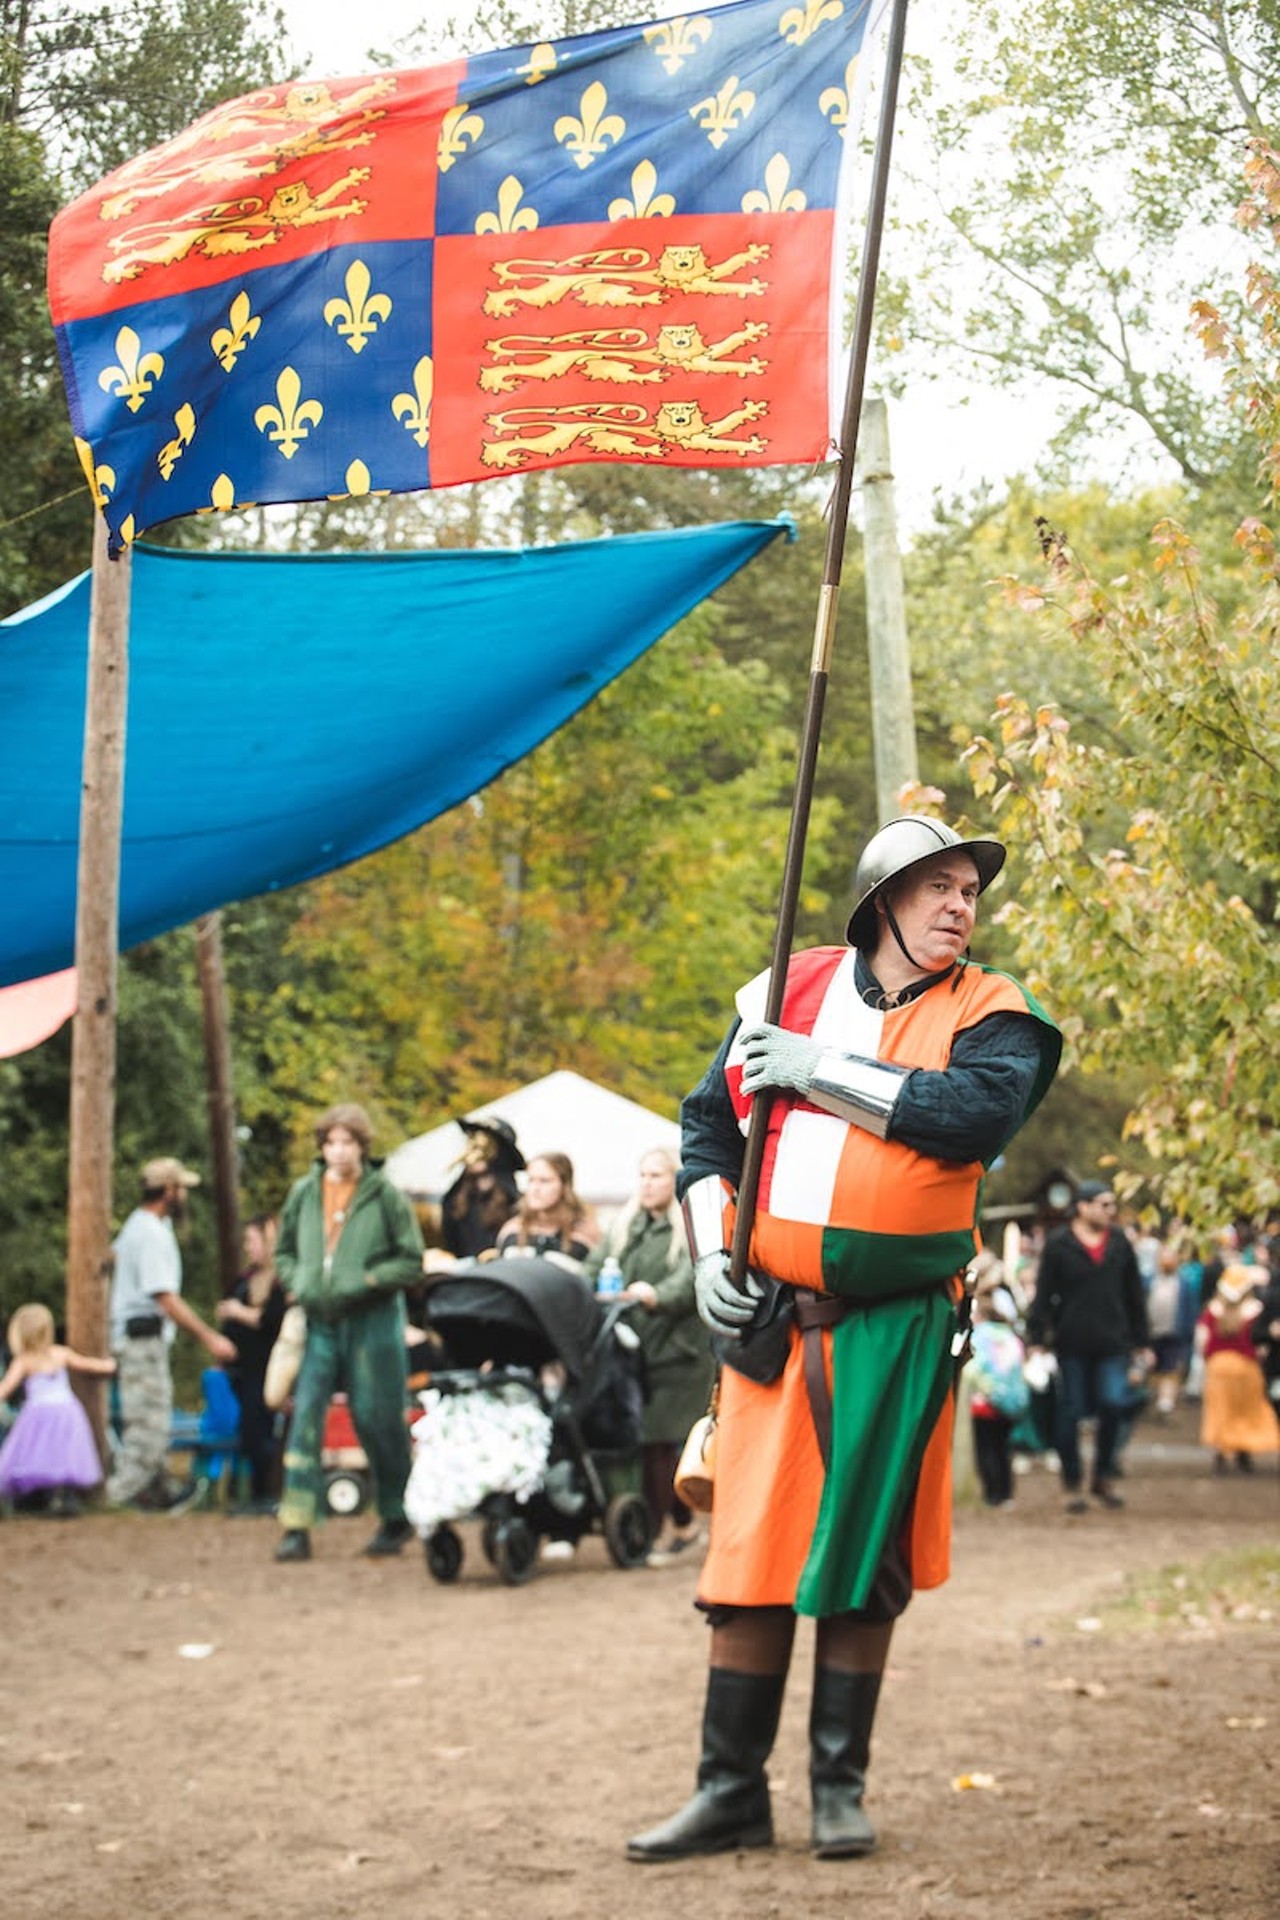 Everything we saw at the Michigan Renaissance Festival 2022